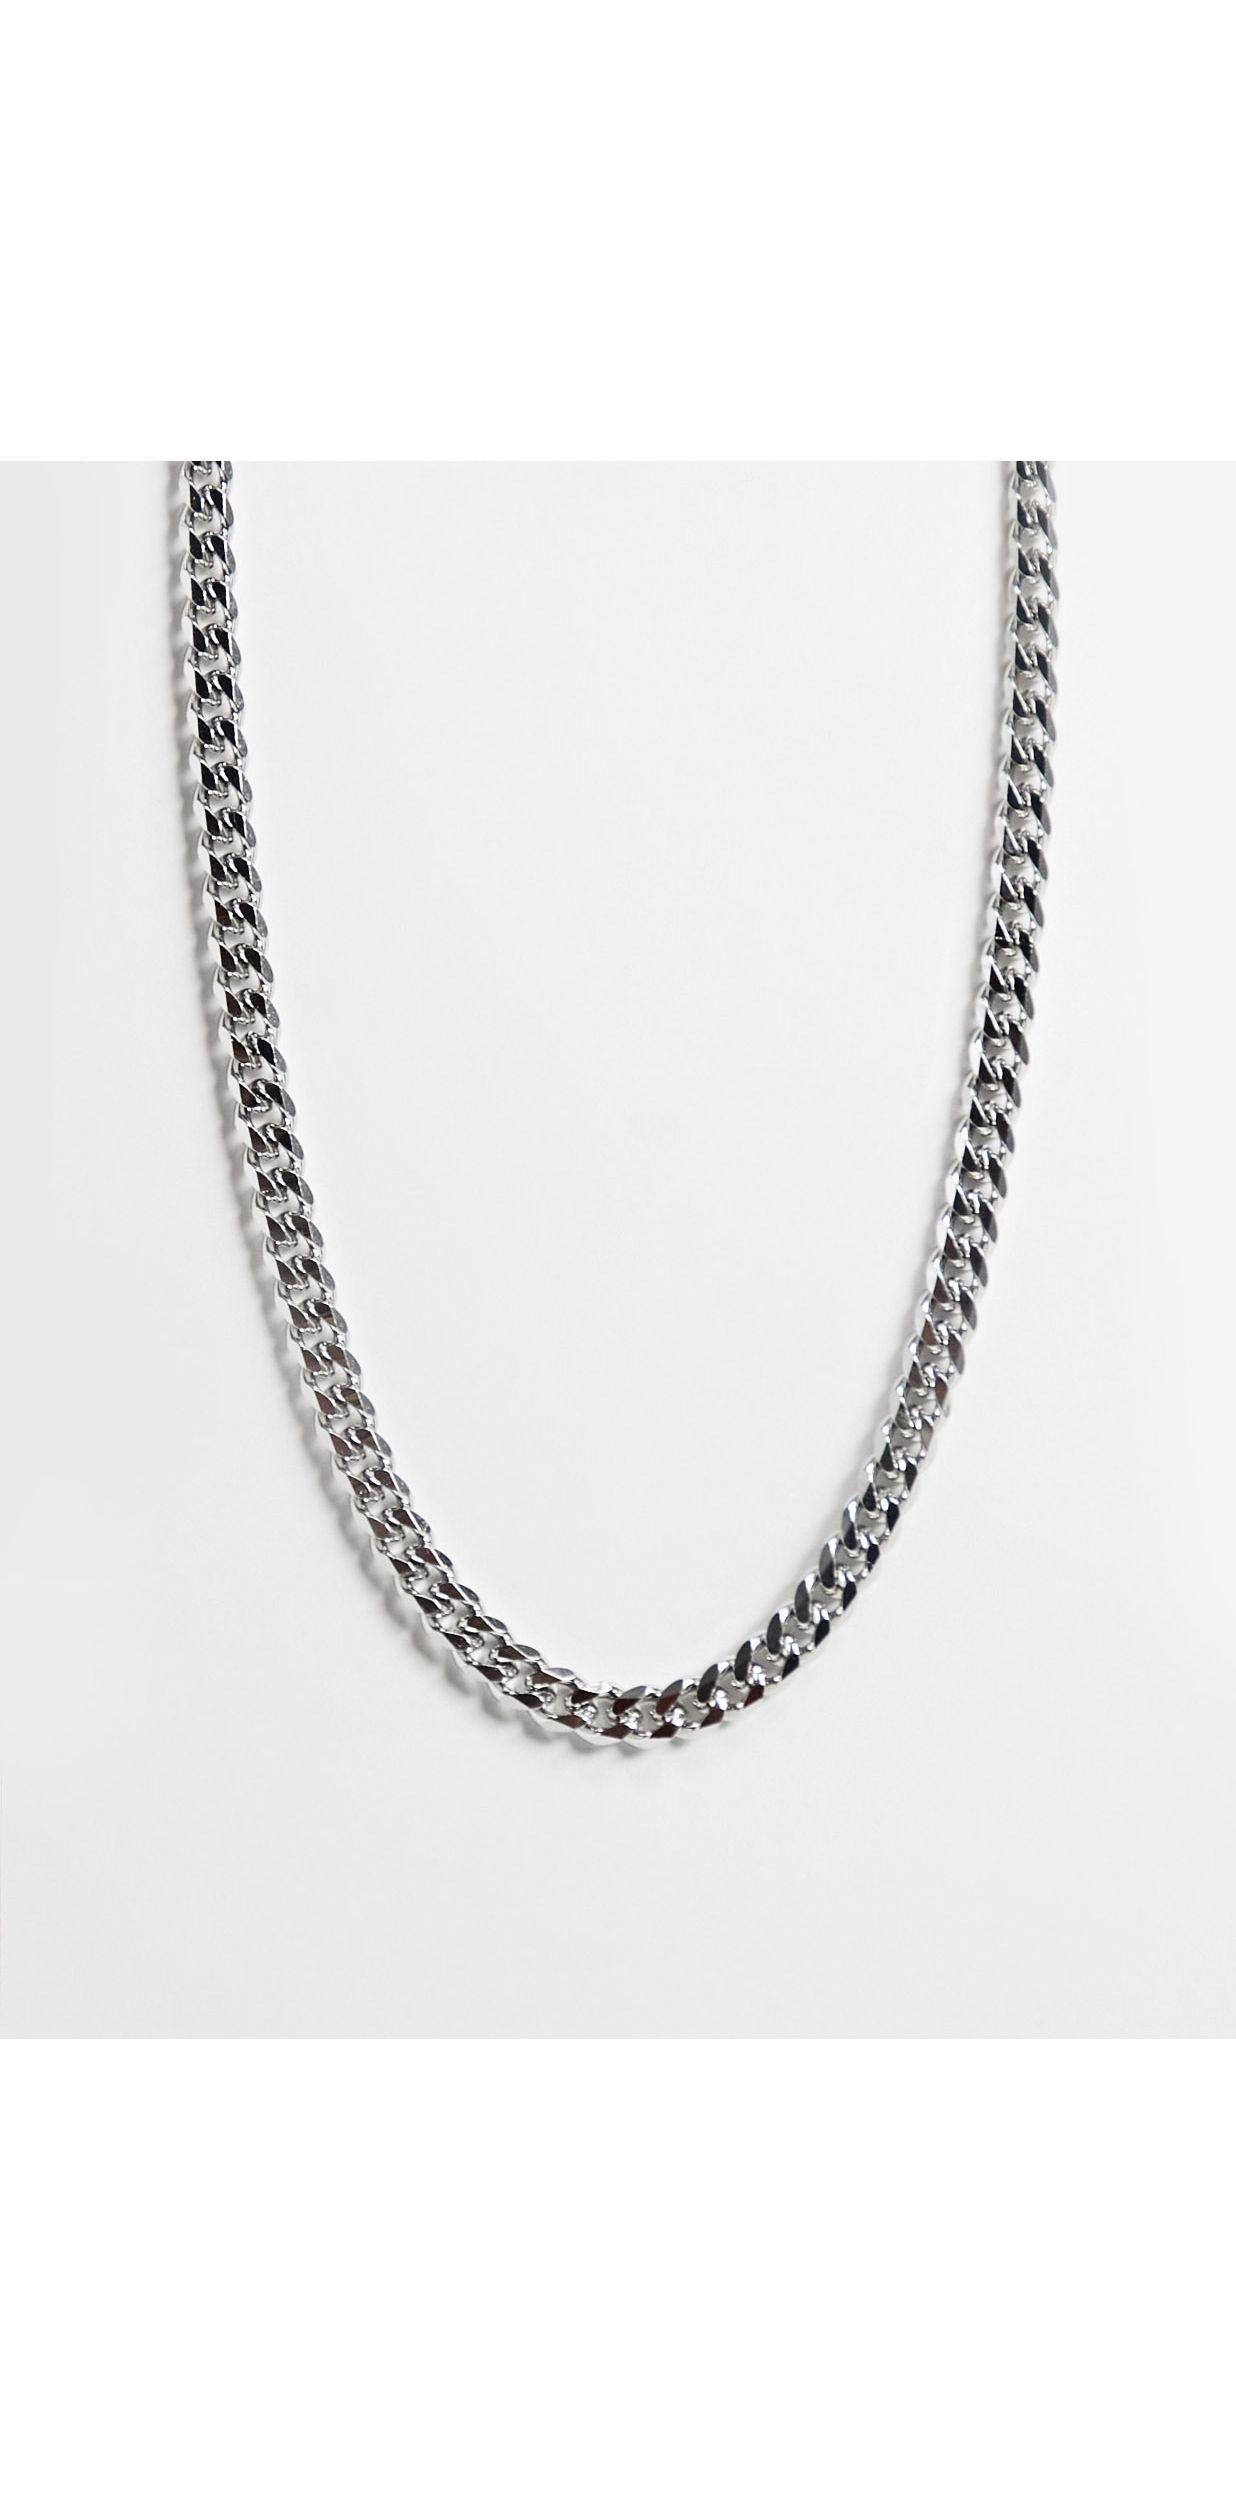 Boss mens stainless steel chain necklace in silver | ASOS